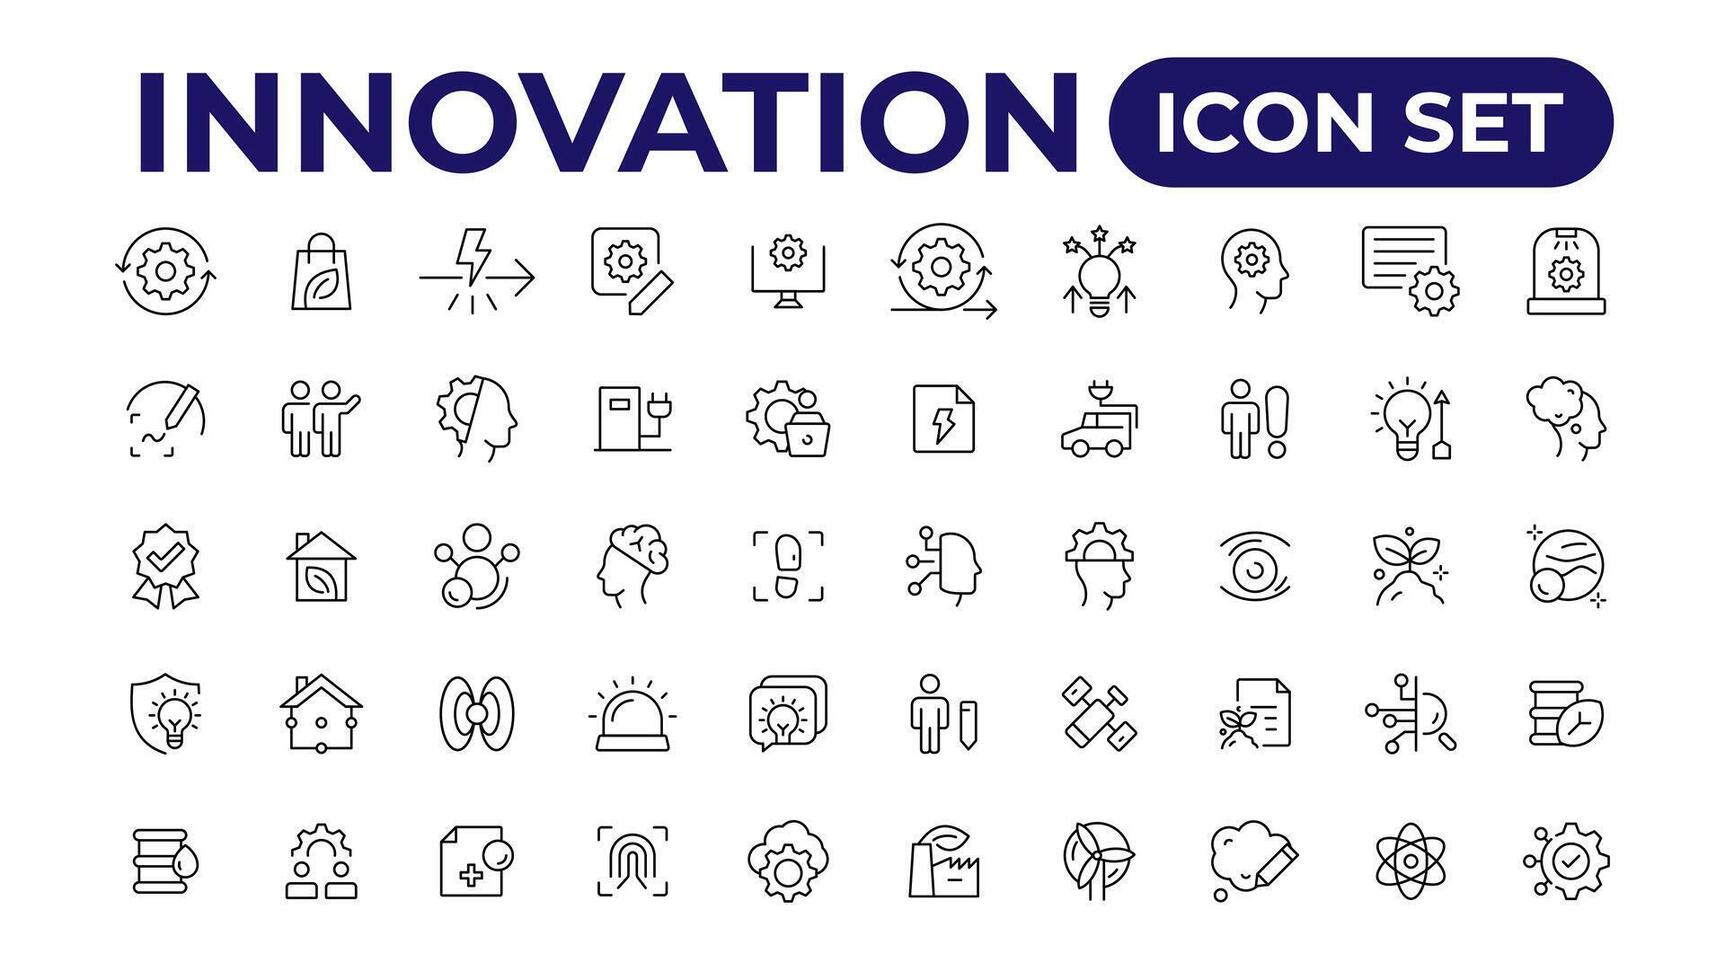 Innovation icon set. Containing creativity, invention, prototype, visionary, idea generation.Outline icon collection. vector